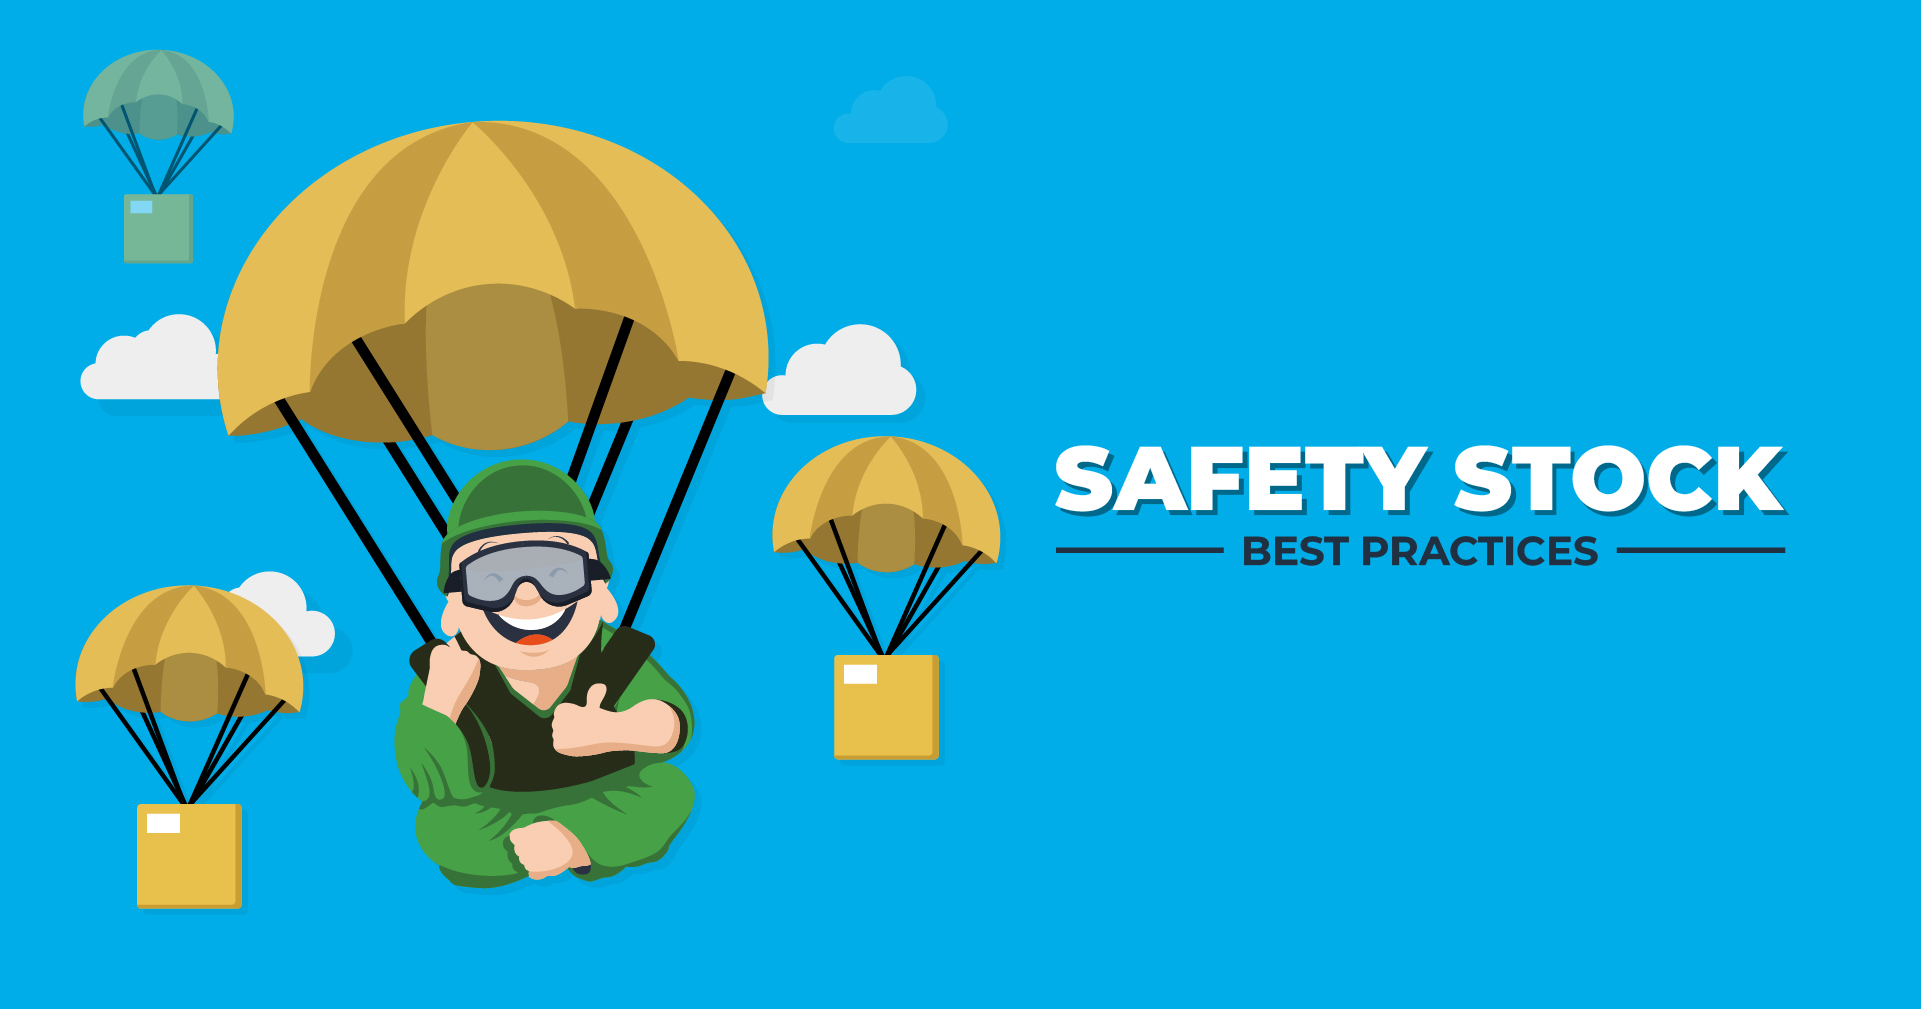 Safety Stock Best Practices